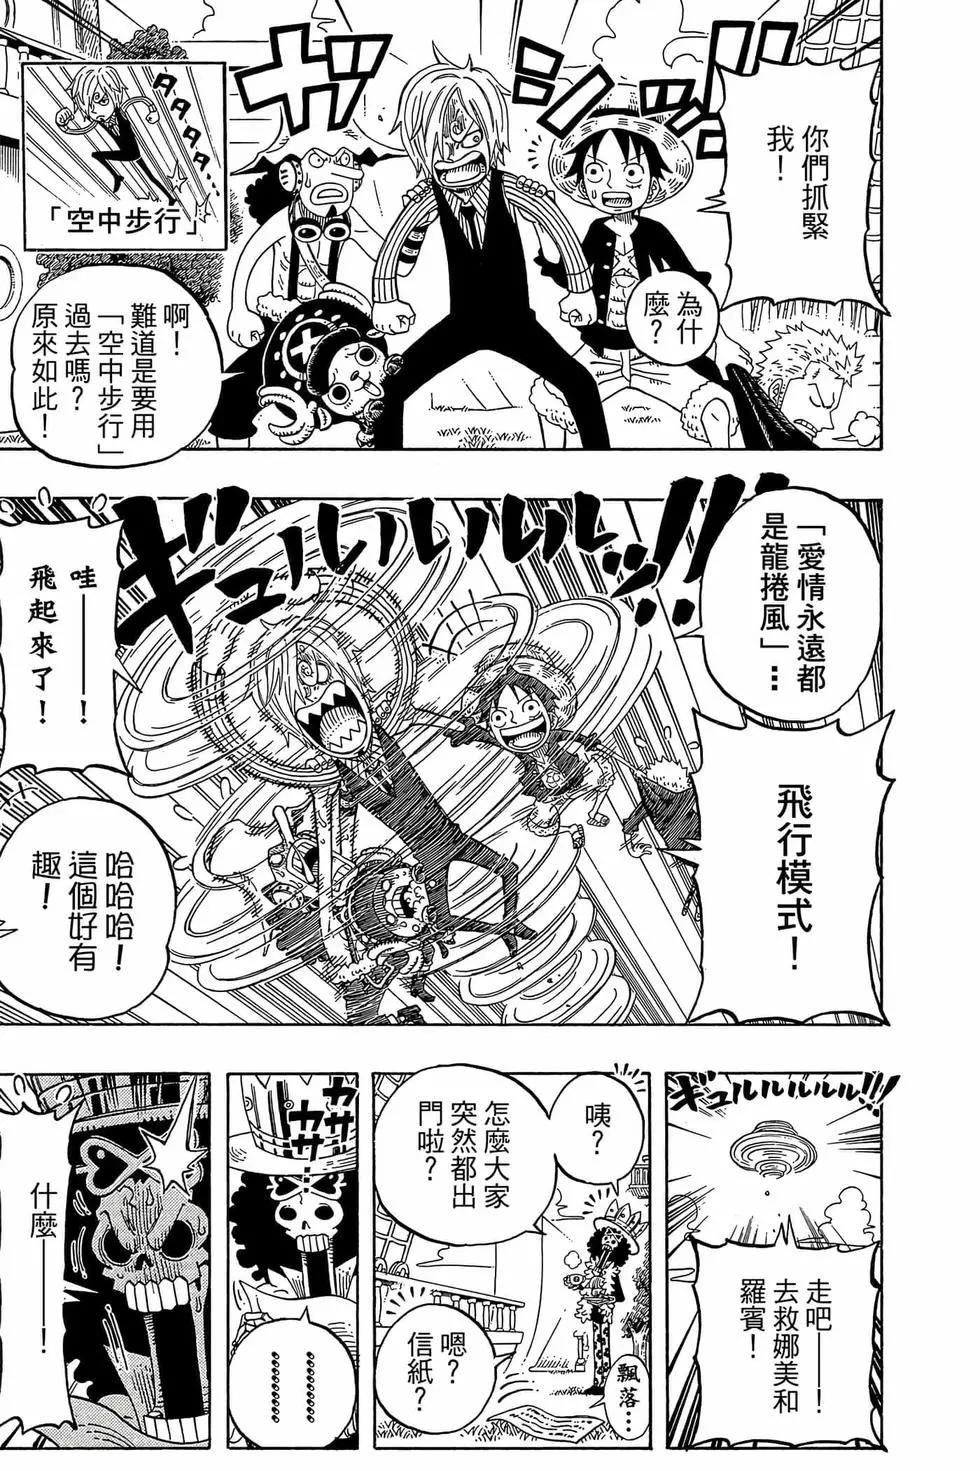 One piece party - 第01卷(1/4) - 6